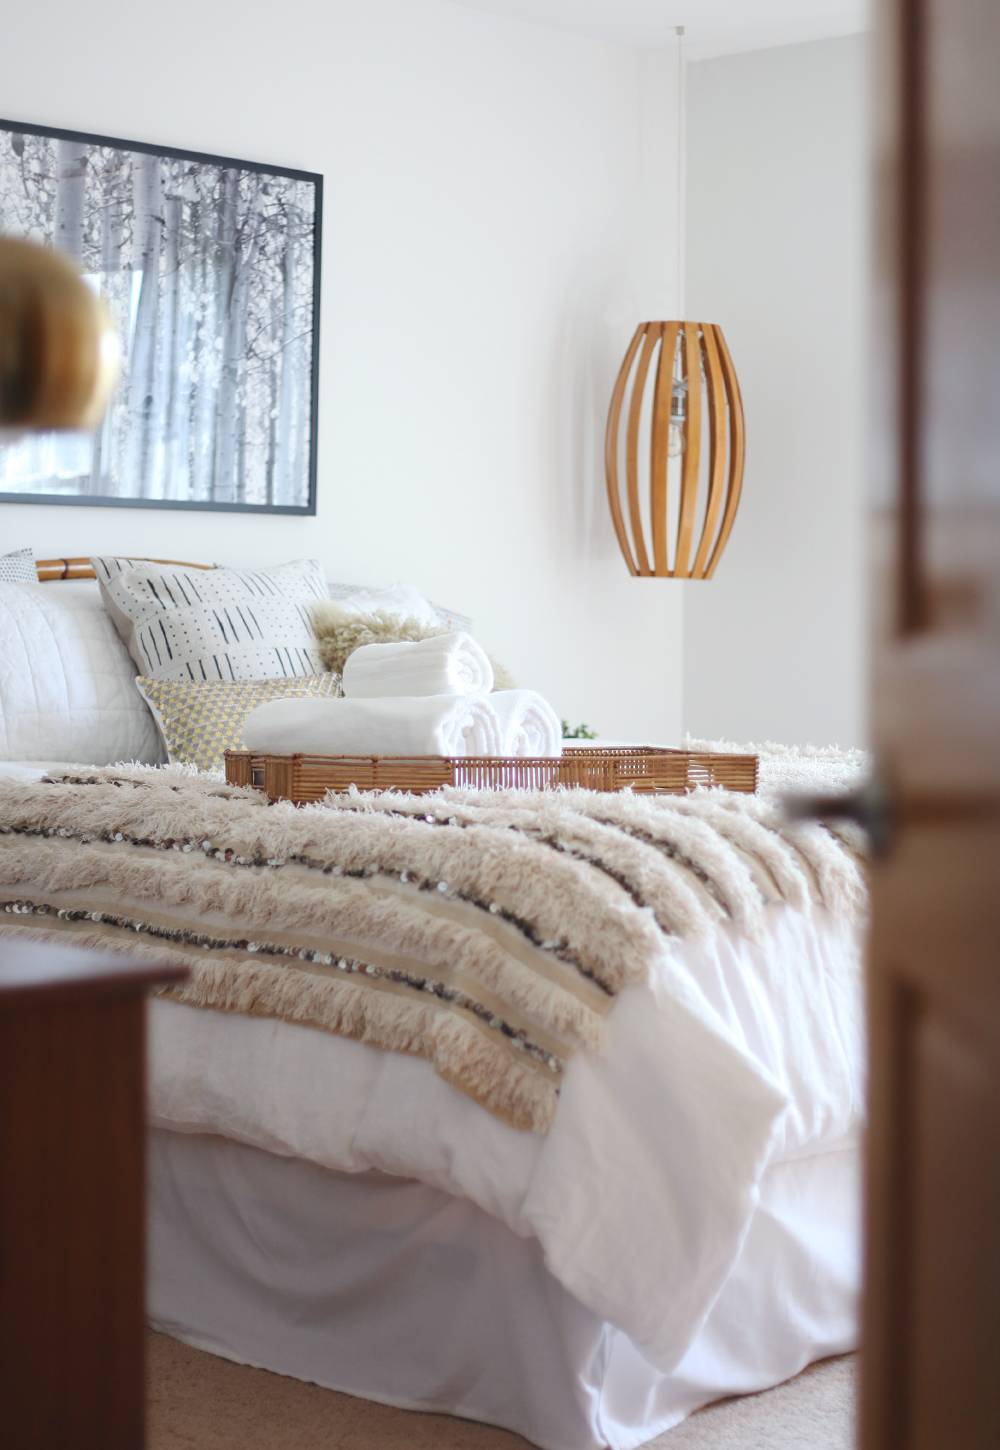 Get Inspired: 20 Gorgeous Bohemian Bedrooms 